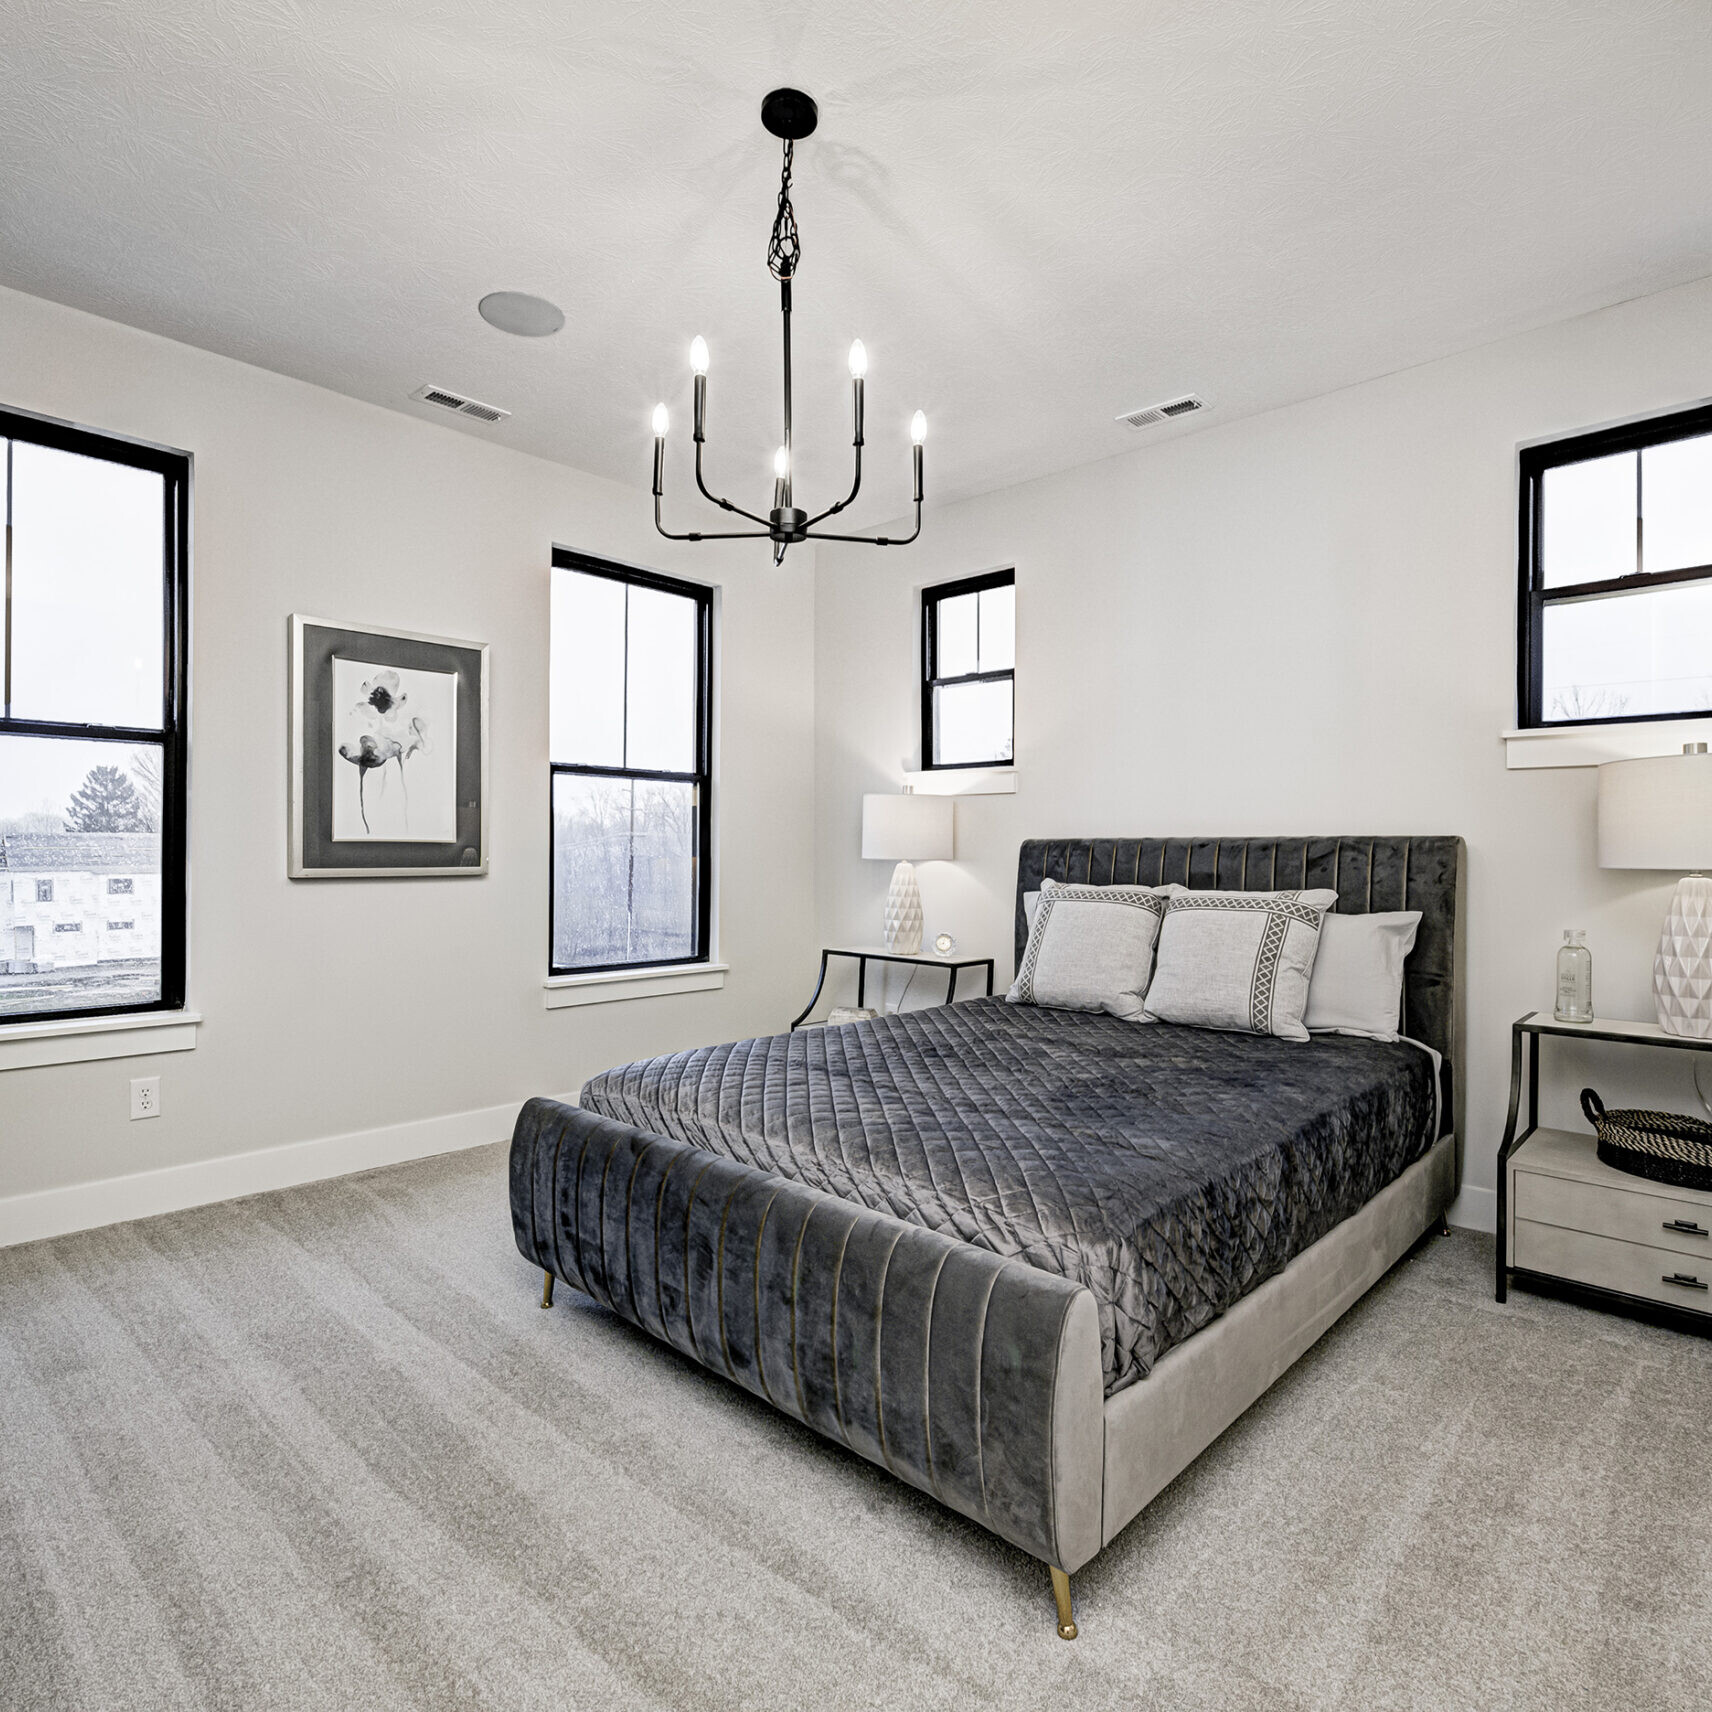 A bedroom with a large bed and a chandelier, found in Indianapolis Custom Homes.